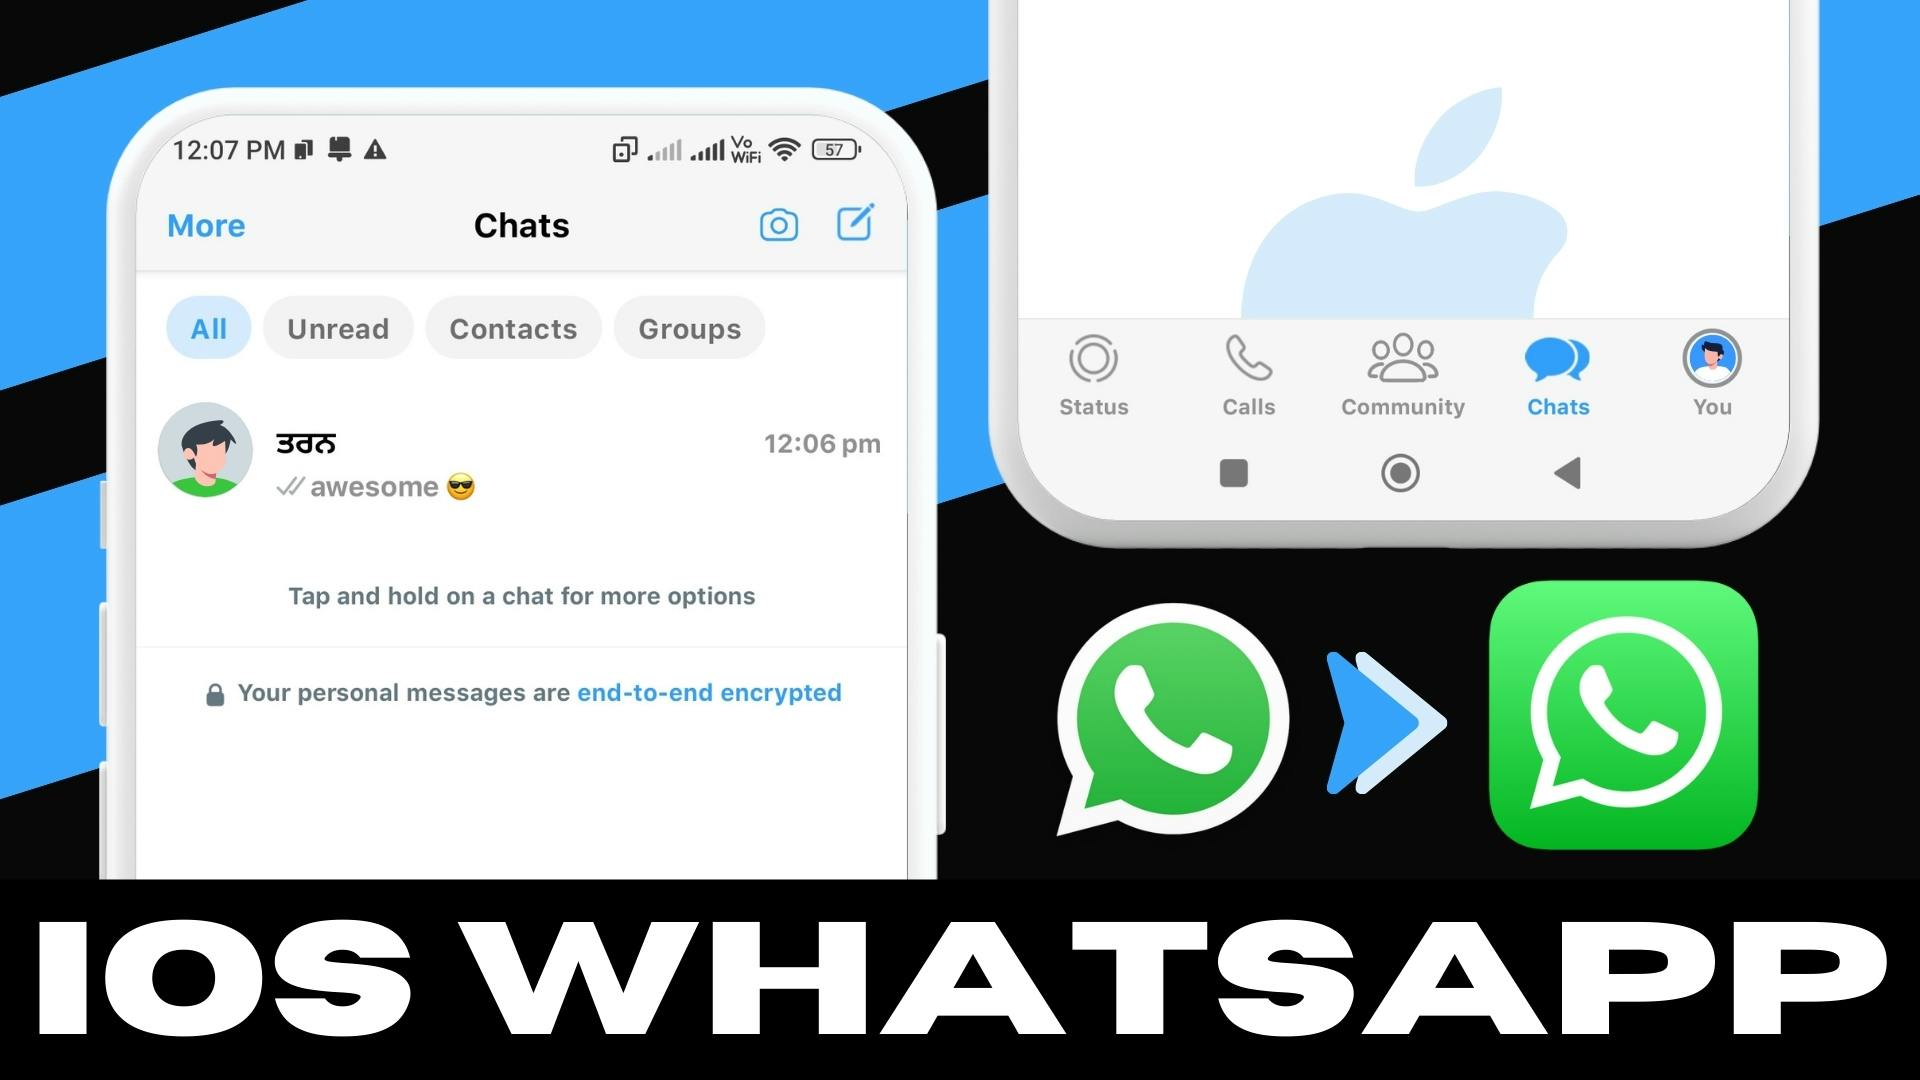 iOS WhatsApp v9.96: A Guide to Installing on Android Devices